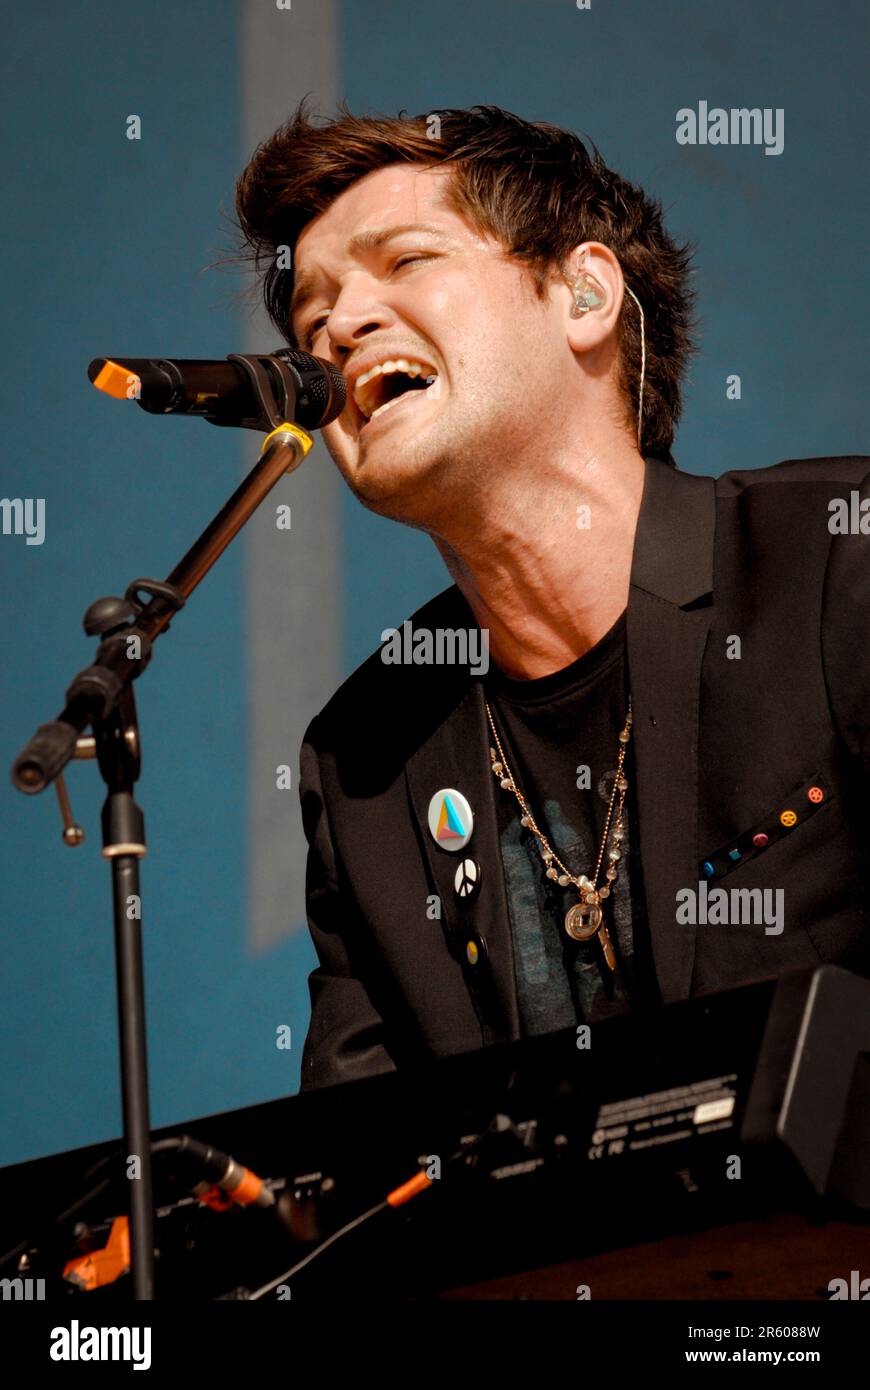 Danny O'Donoghue - The Script, V2009, Hylands Park, Chelmsford, Essex, Britain - 22 August 2009 Stock Photo